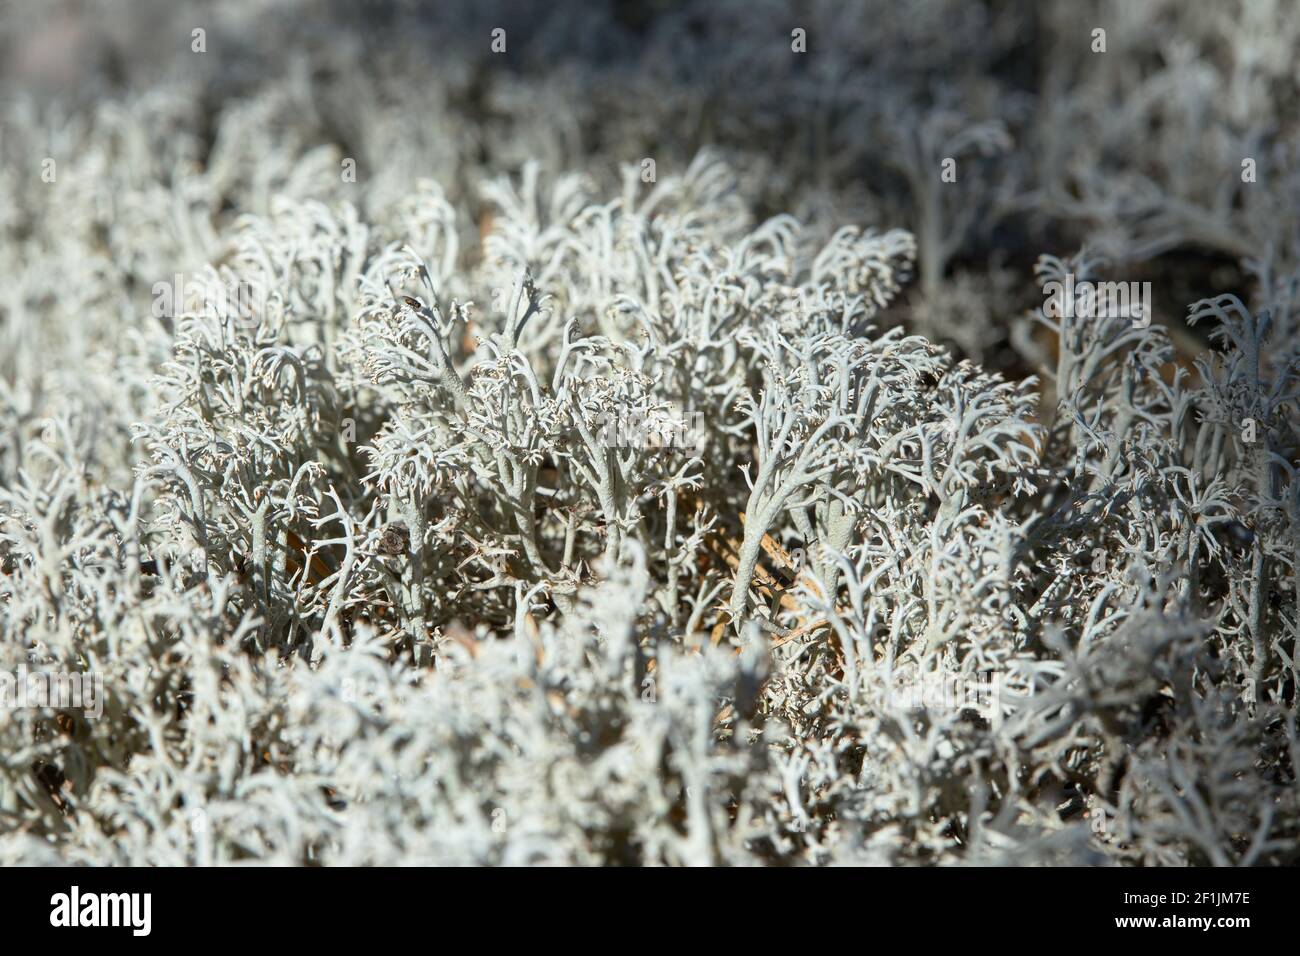 Cladonia stellaris (known also as Northern Reindeer Lichen) growing in the soil, close up Stock Photo